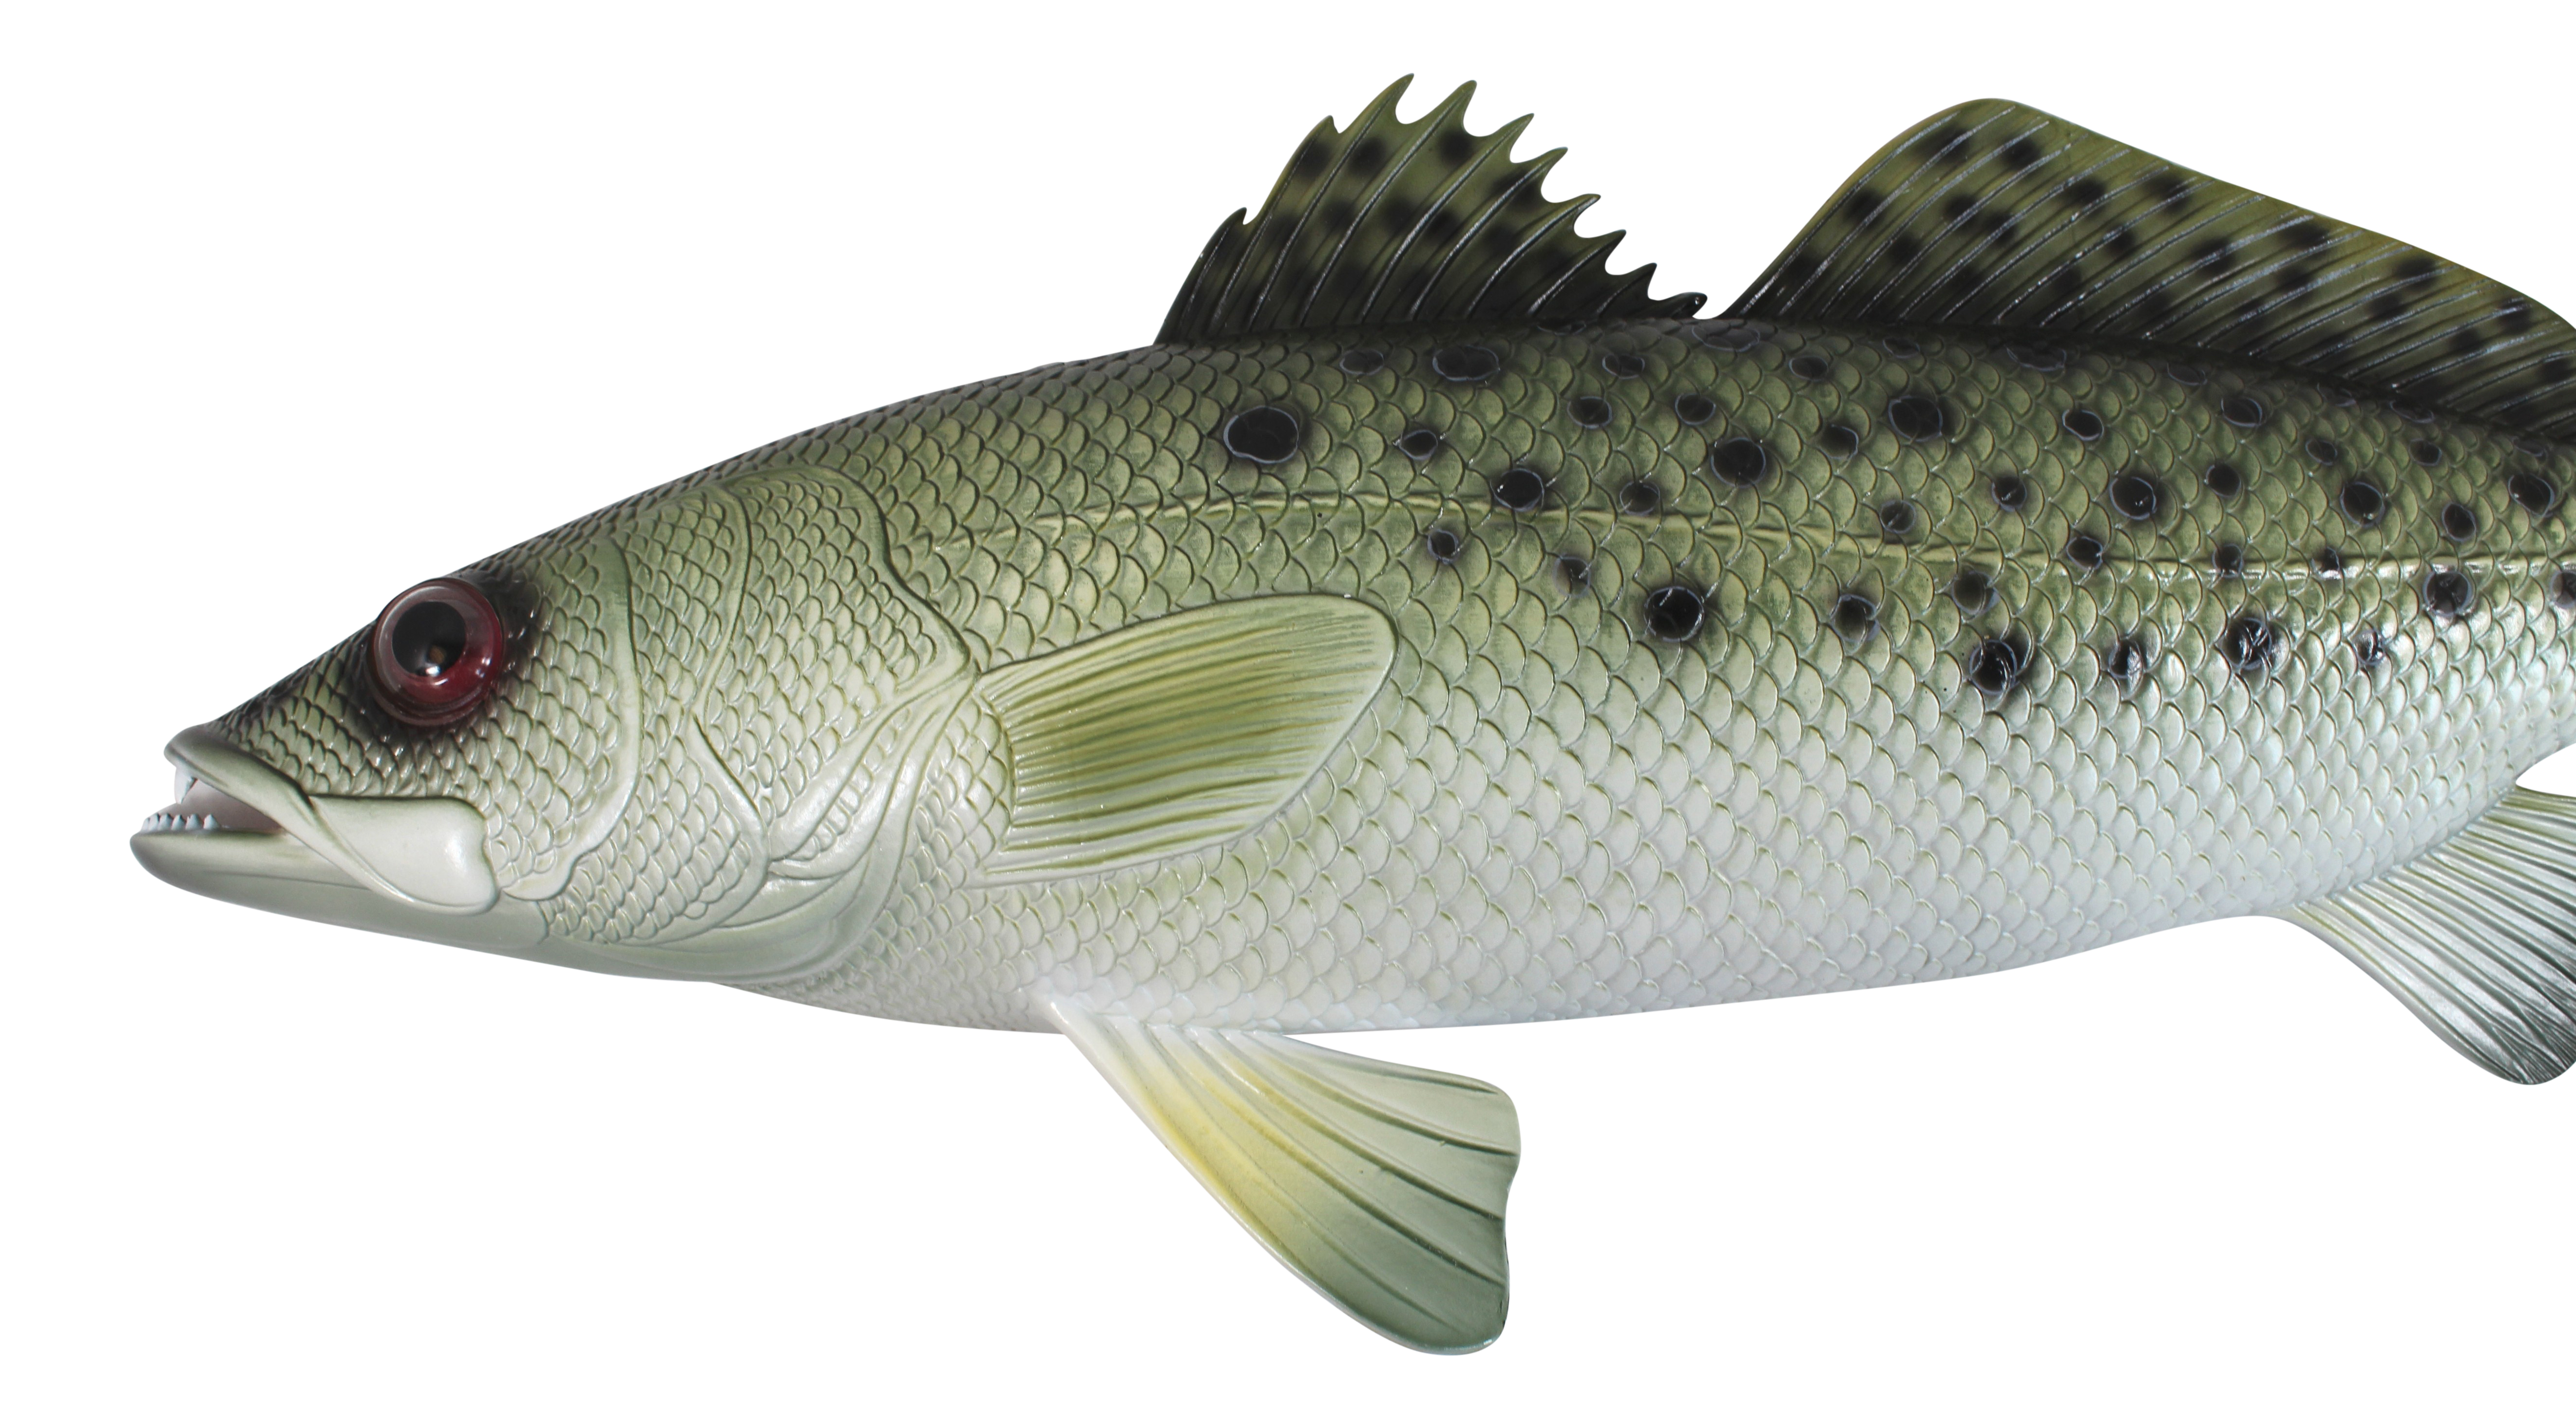 Charlotte International Spotted Sea Trout Replica Nautical Saltwater Fishing Wall Decor 28 Inches